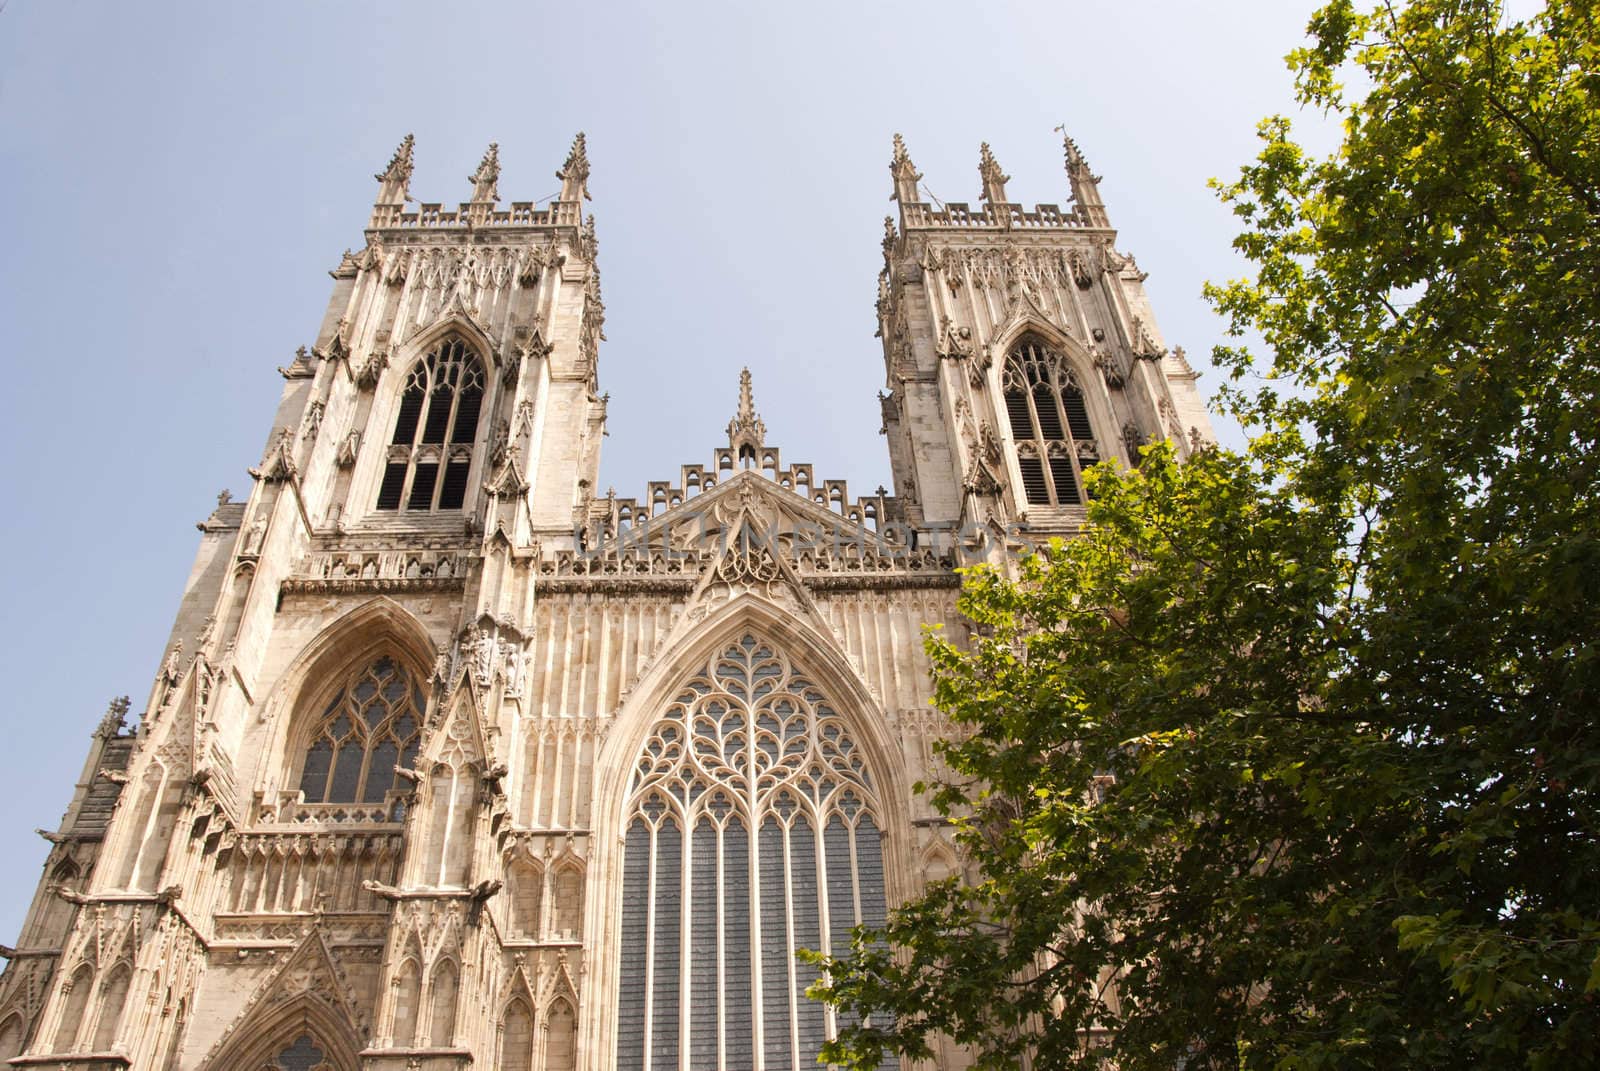 A View of the West Entrance of York Minster Yorkshire England under a blue sky